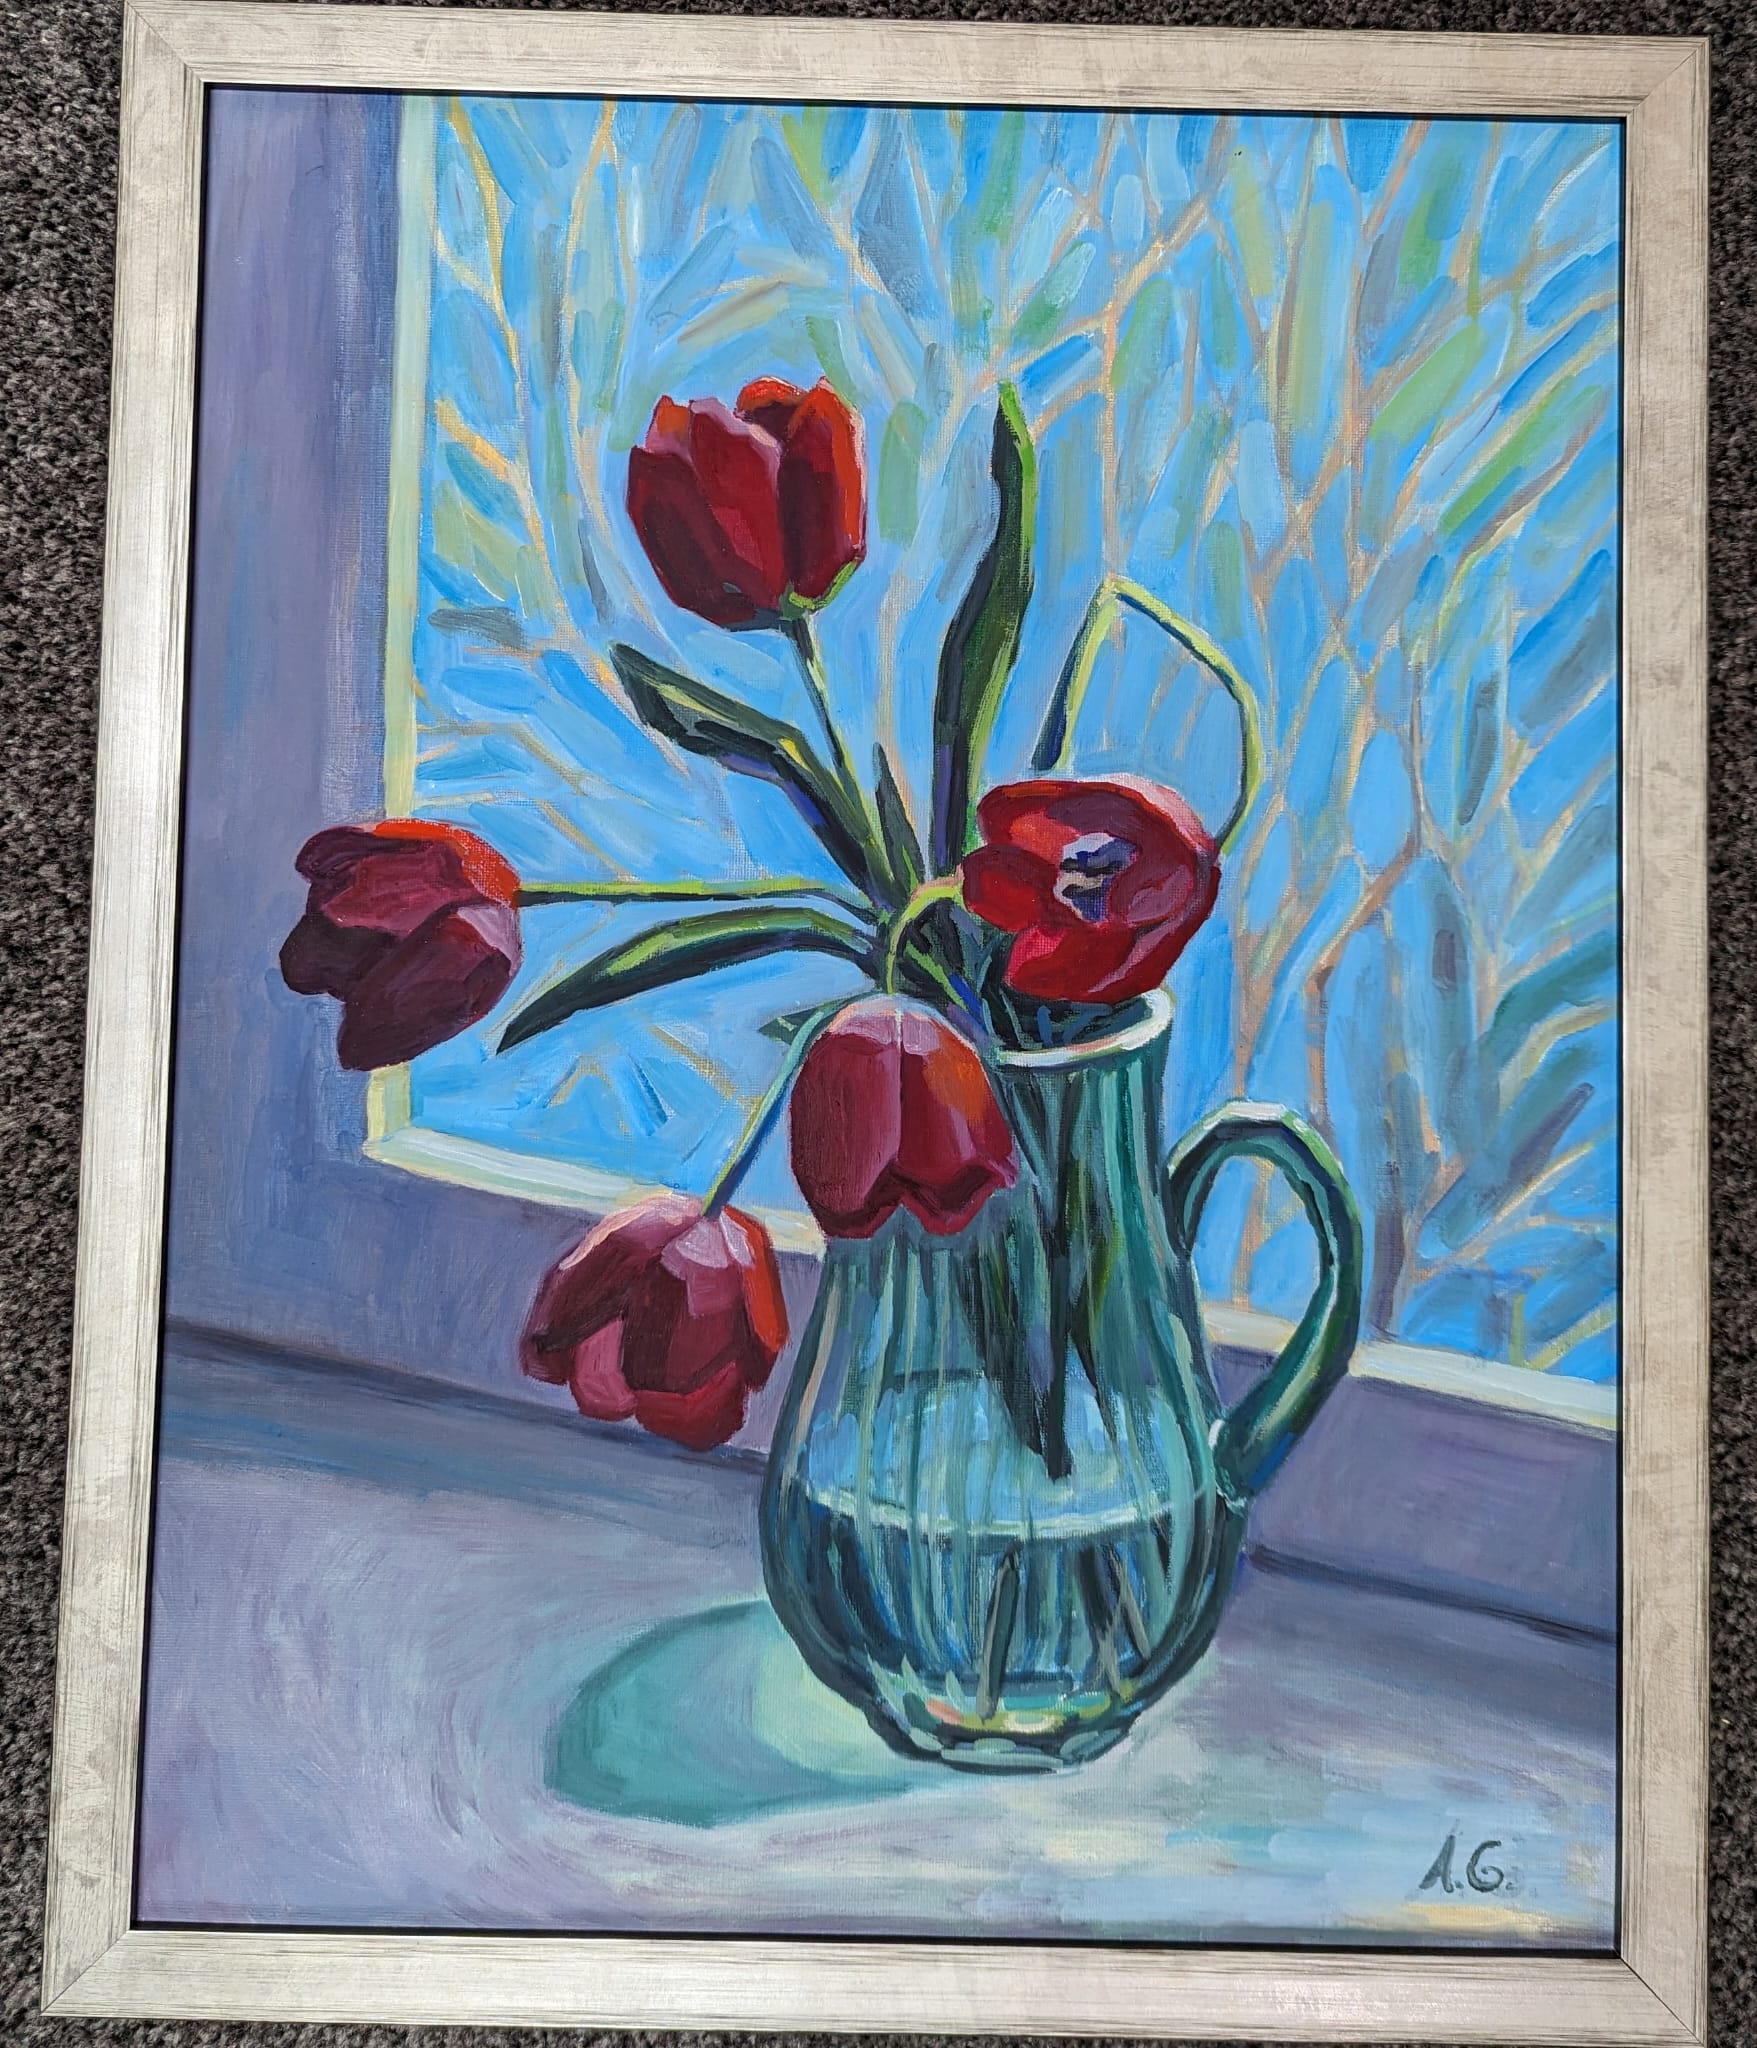 "Tulips in the window" by Anya Goldenberg